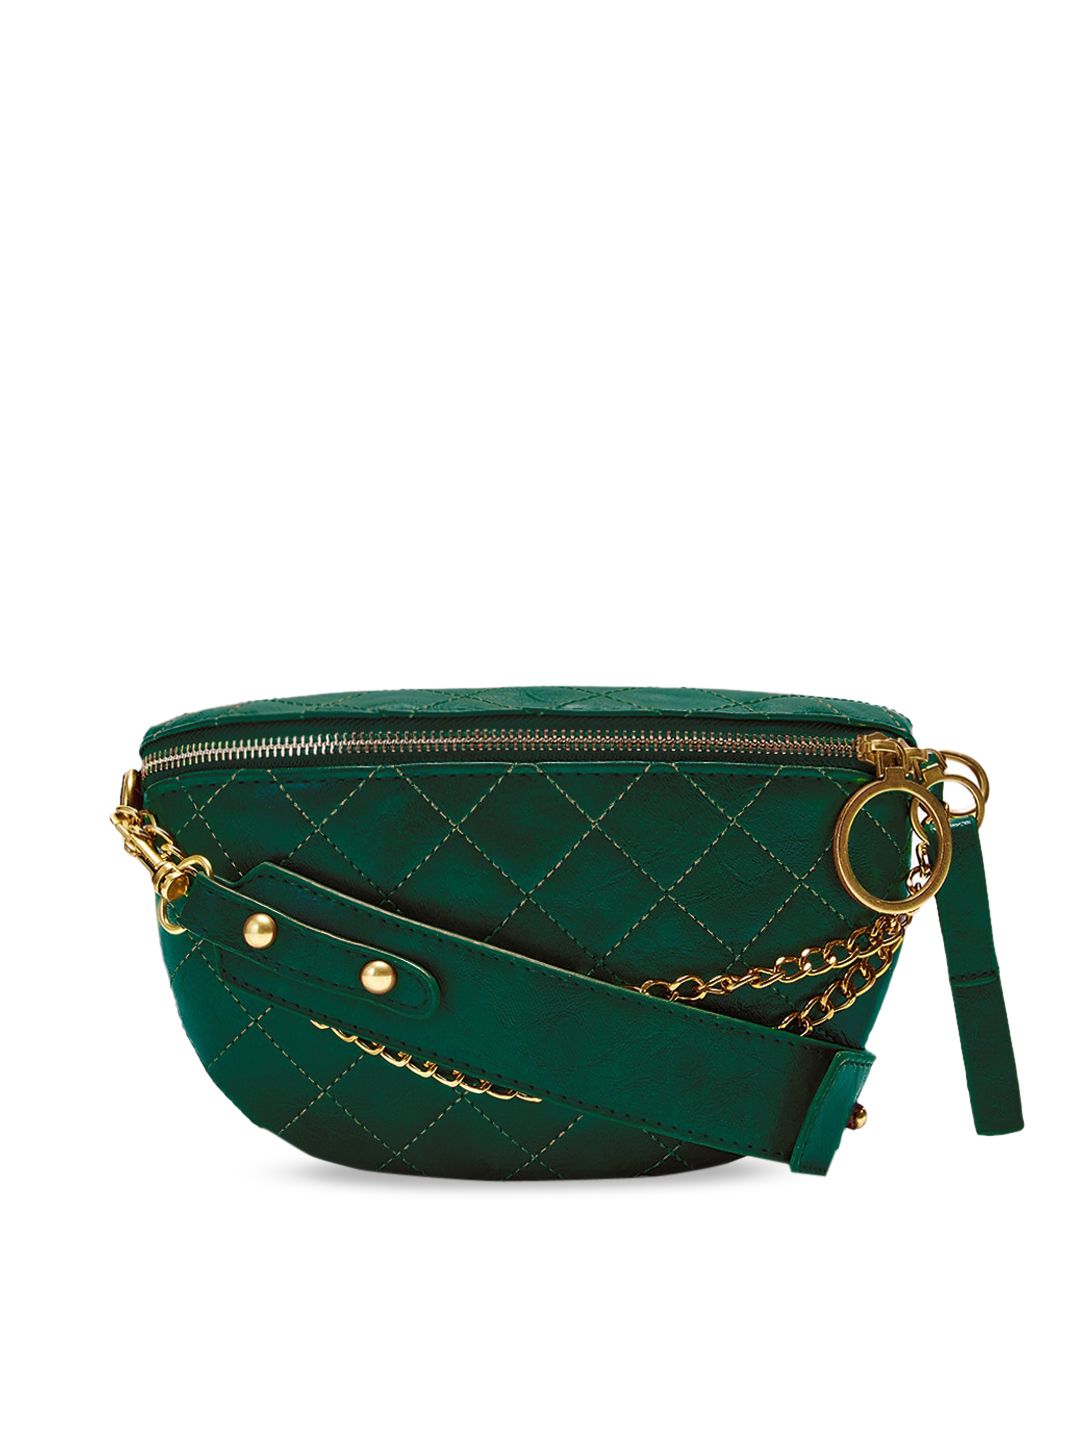 VISMIINTREND Green Quilted Sling Bag Price in India